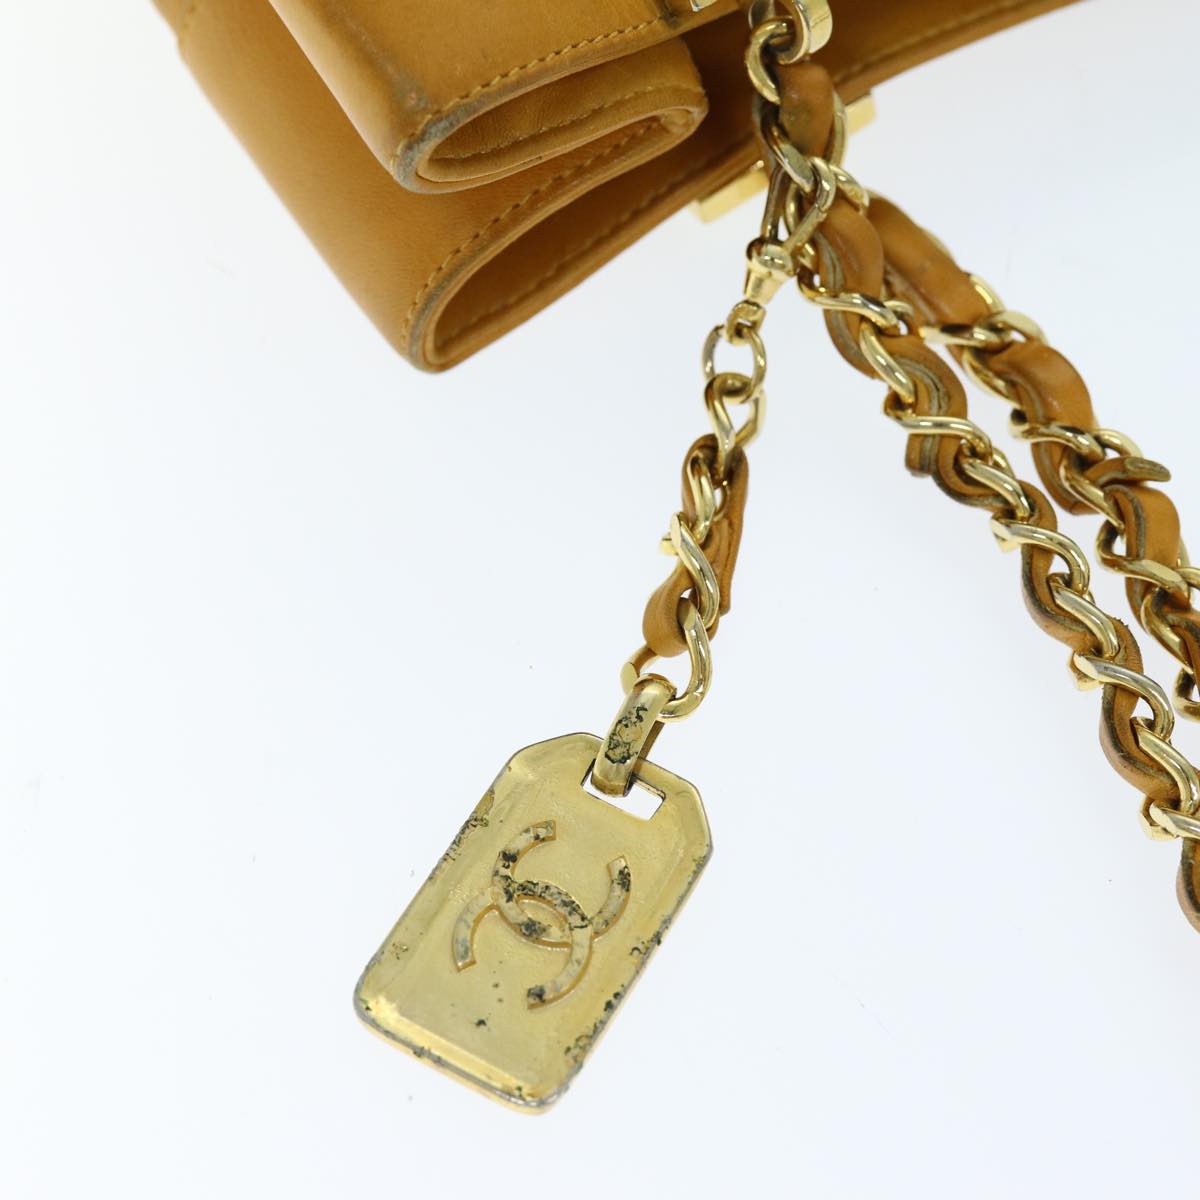 CHANEL Bicolole Chain Shoulder Bag Leather Yellow CC Auth bs13881